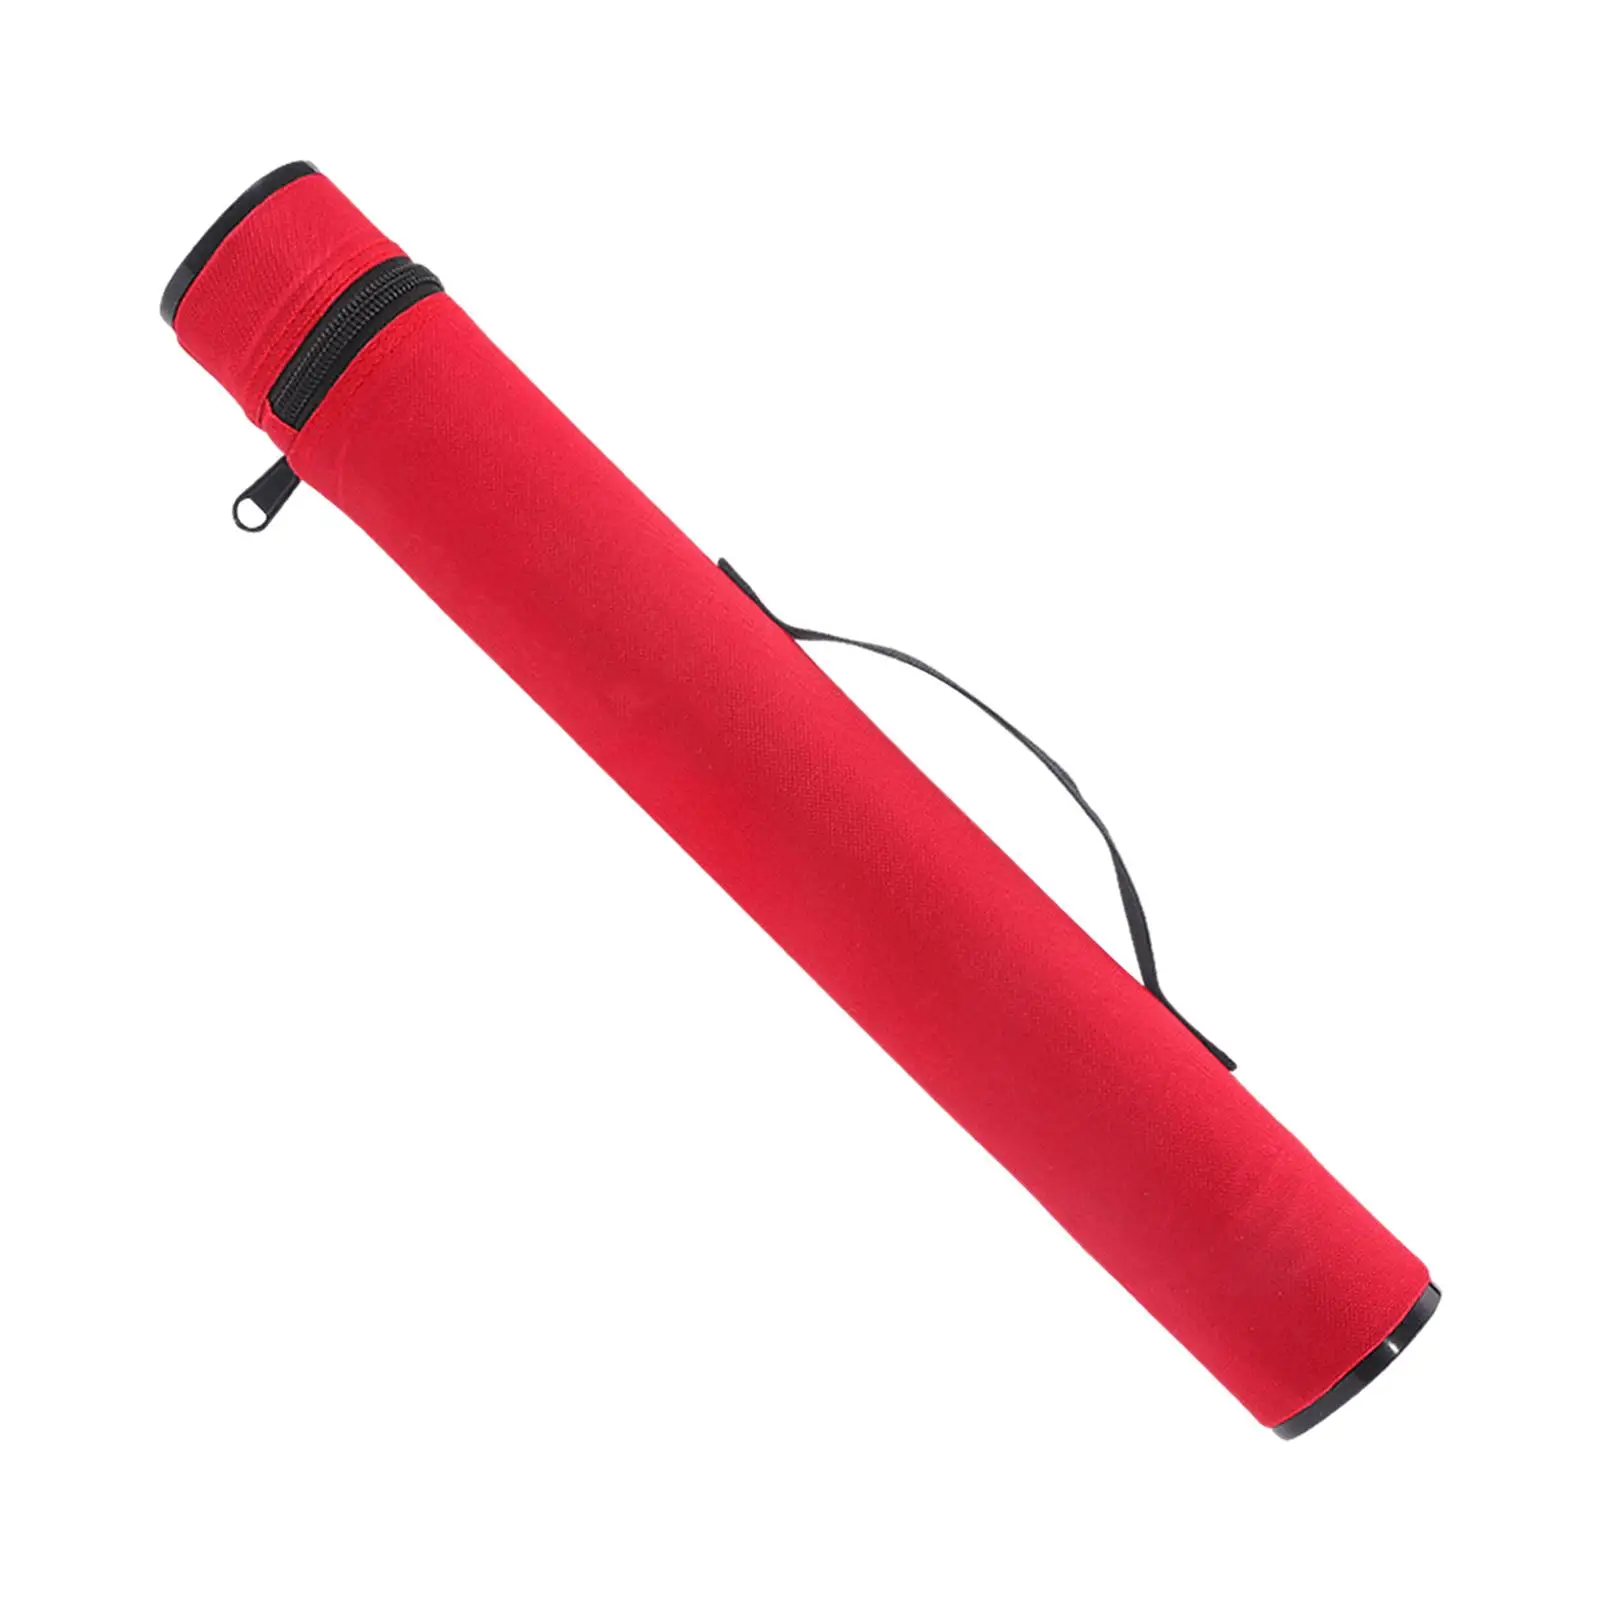 Fly Fishing Rods case Fishing Equipment Protective Cover Portable Men Gift